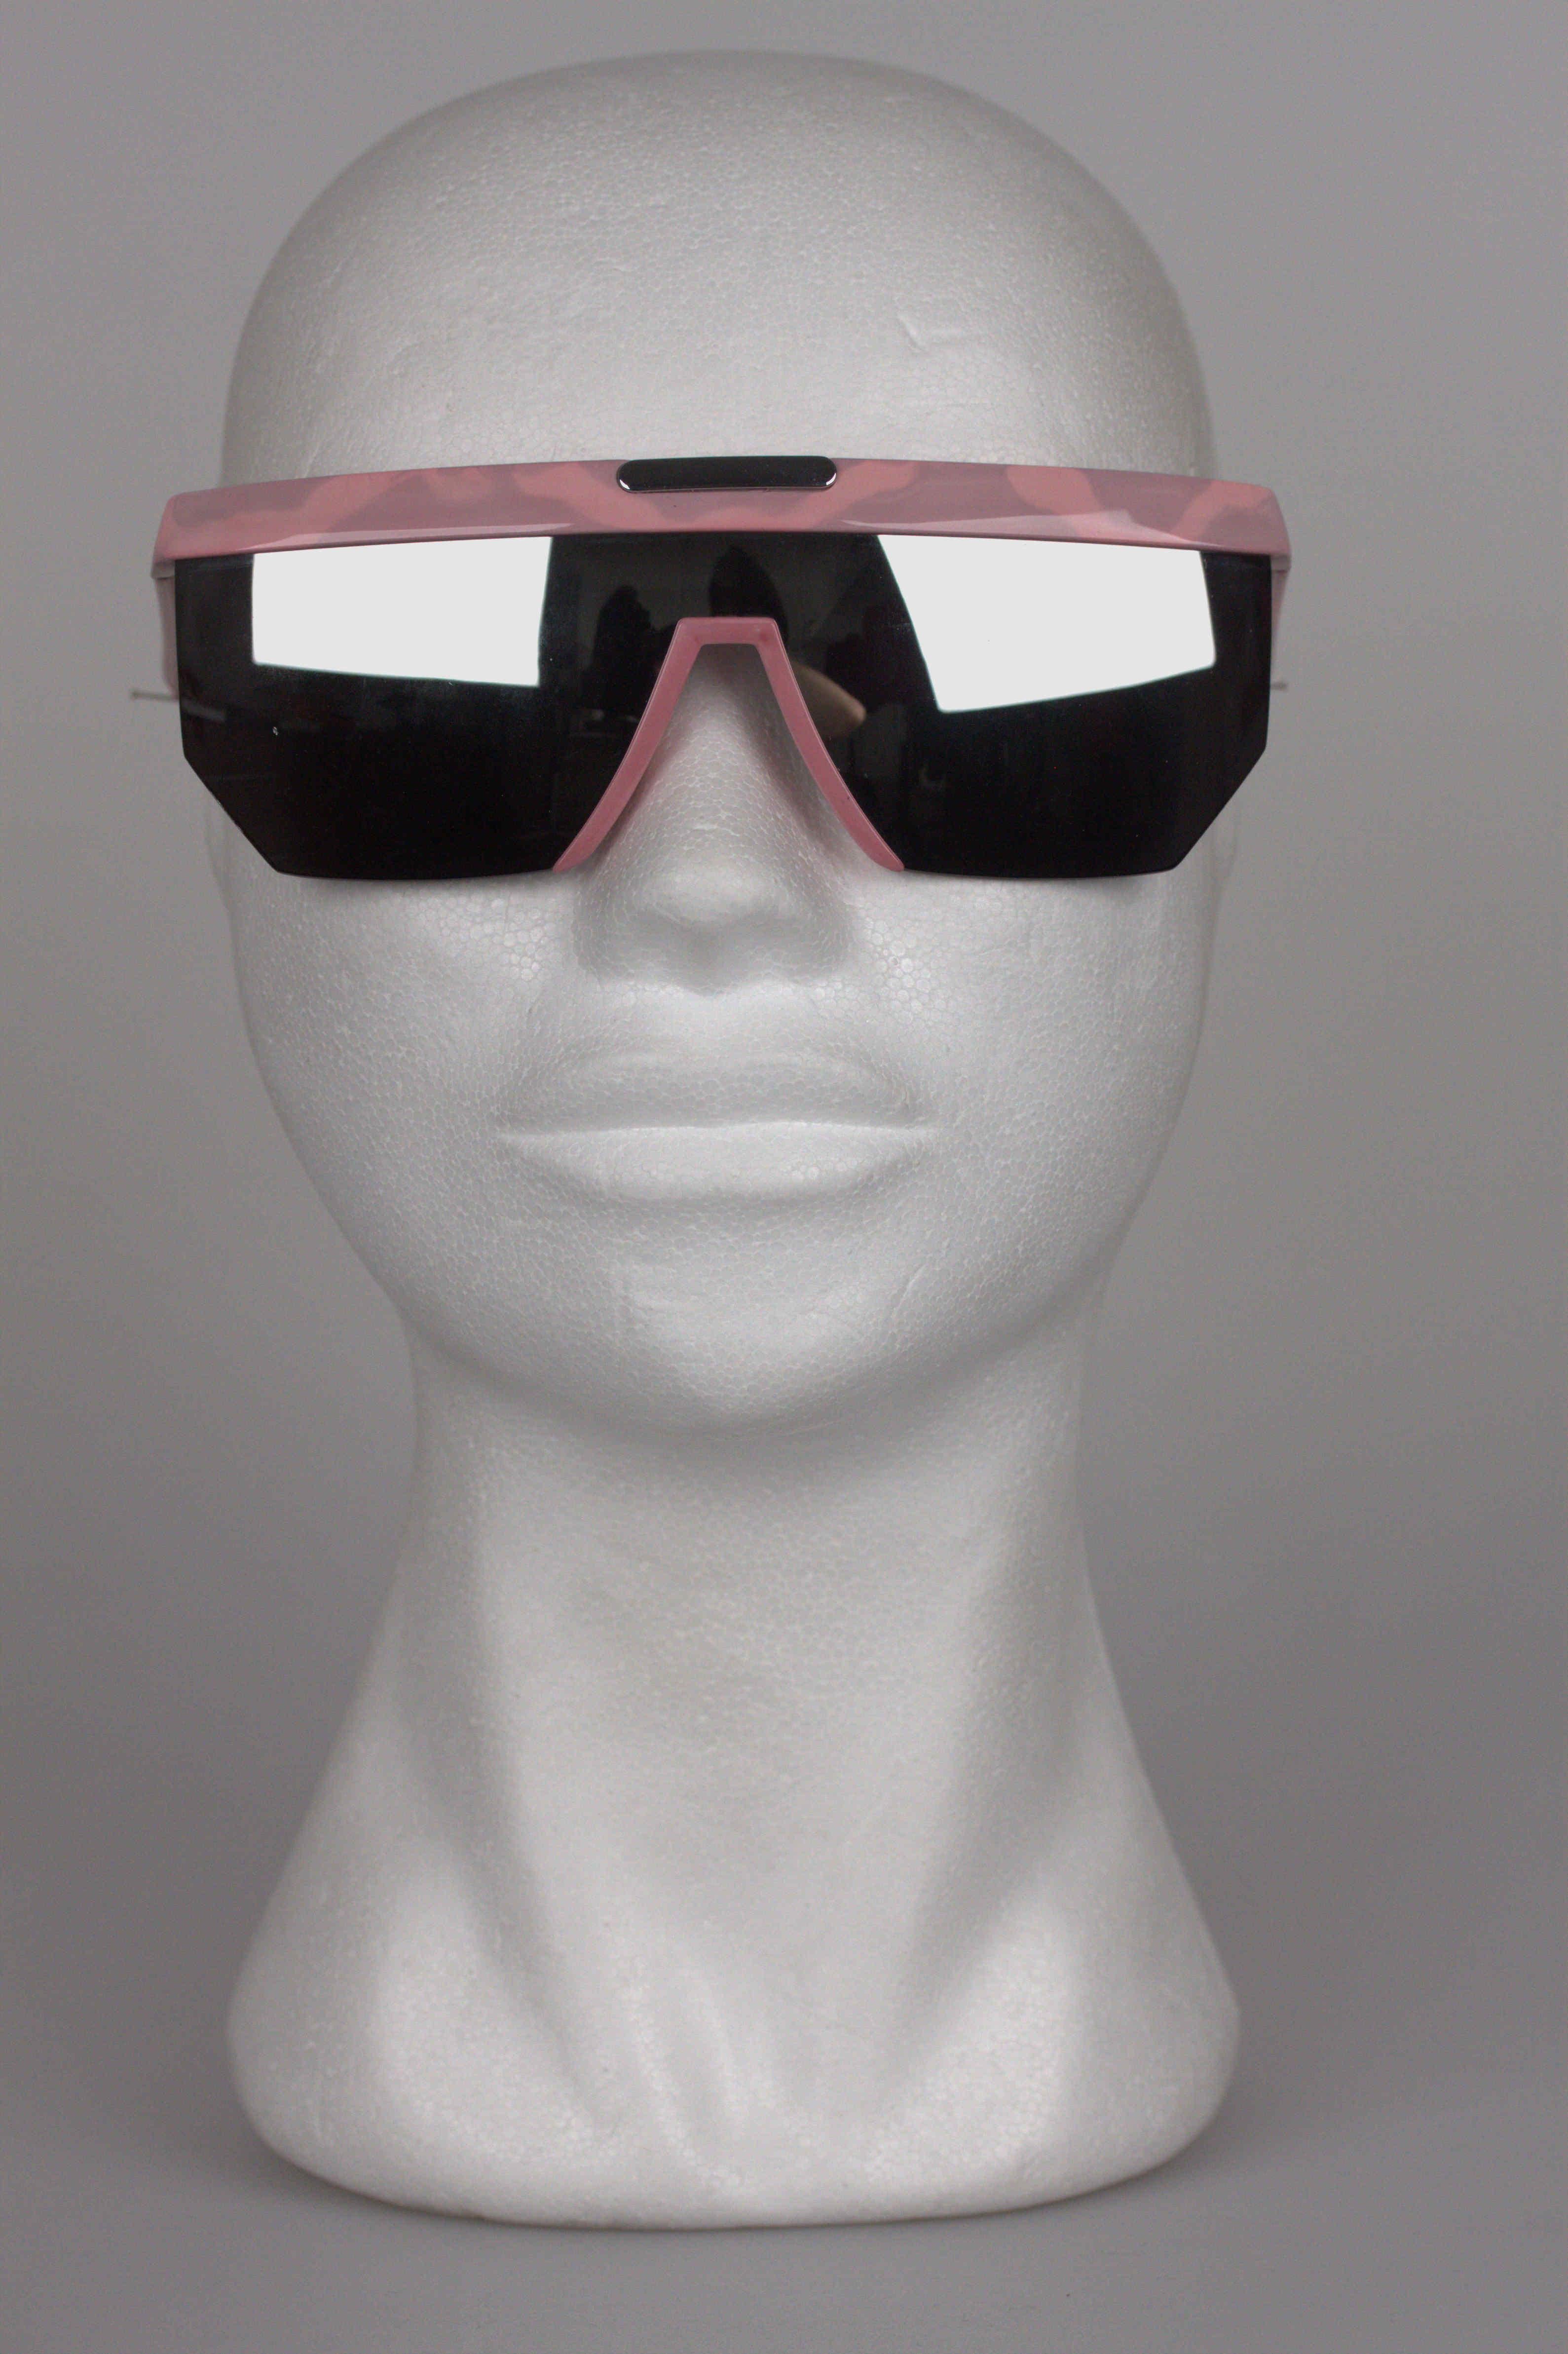 MATERIAL: Acetate

COLOR: Pink

MODEL: M 3077

GENDER: Women

SIZE: Medium

COUNTRY OF MANUFACTURE: Italy

Condition
CONDITION DETAILS:

A+ :MINT CONDITION! Mint item. Never worn or used

Measurements
TEMPLE MAX. LENGTH: 125 mm
EYE / LENS MAX.